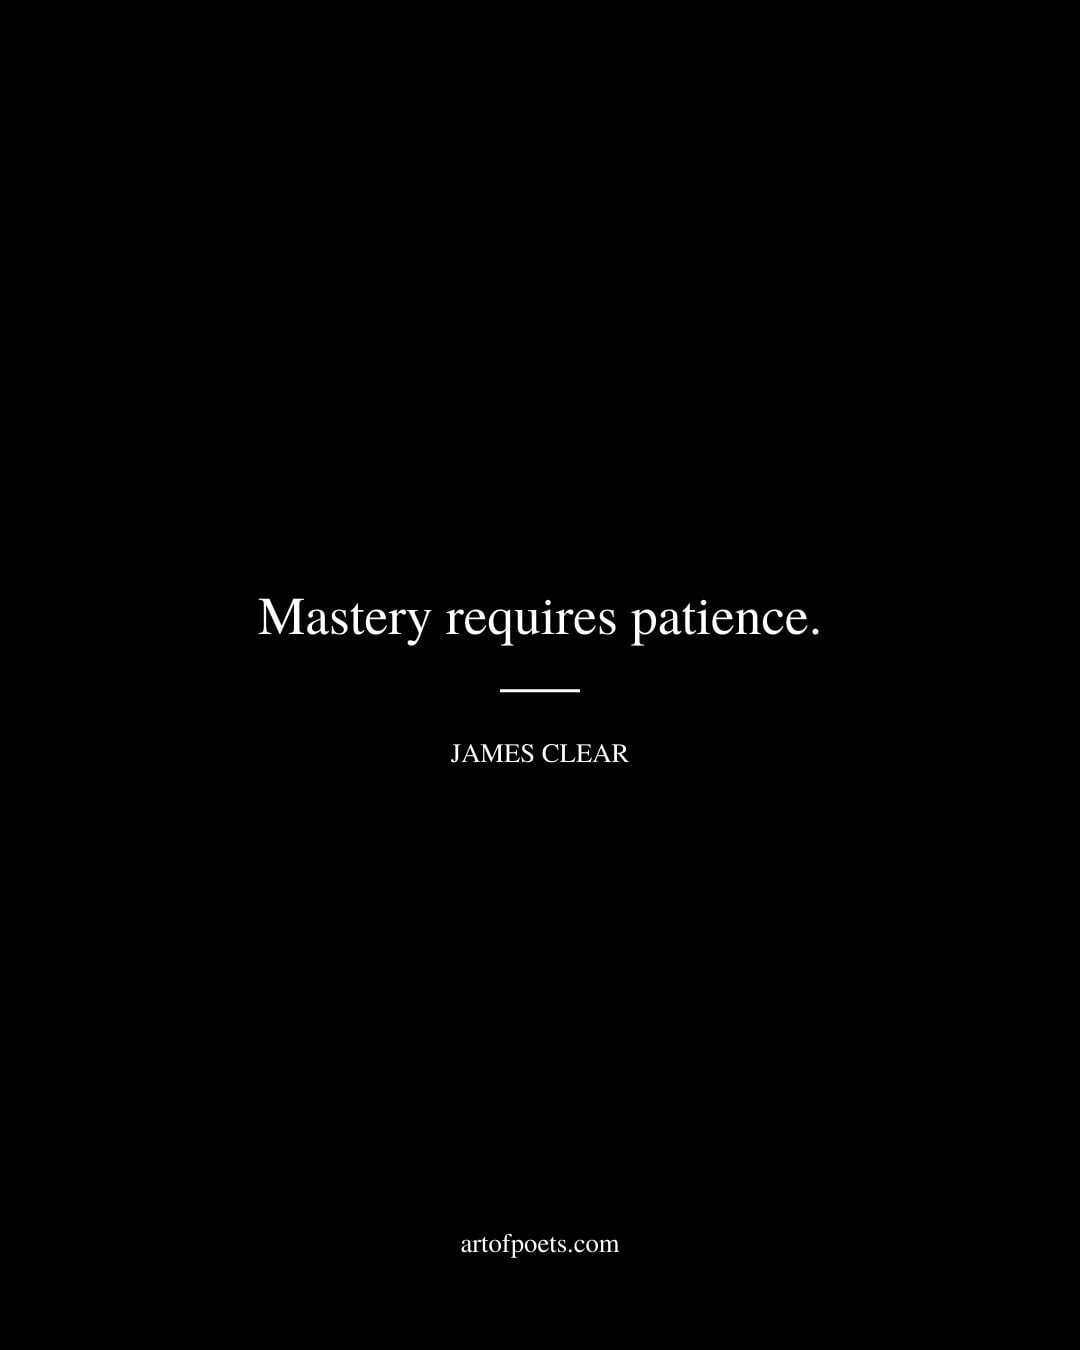 Mastery requires patience